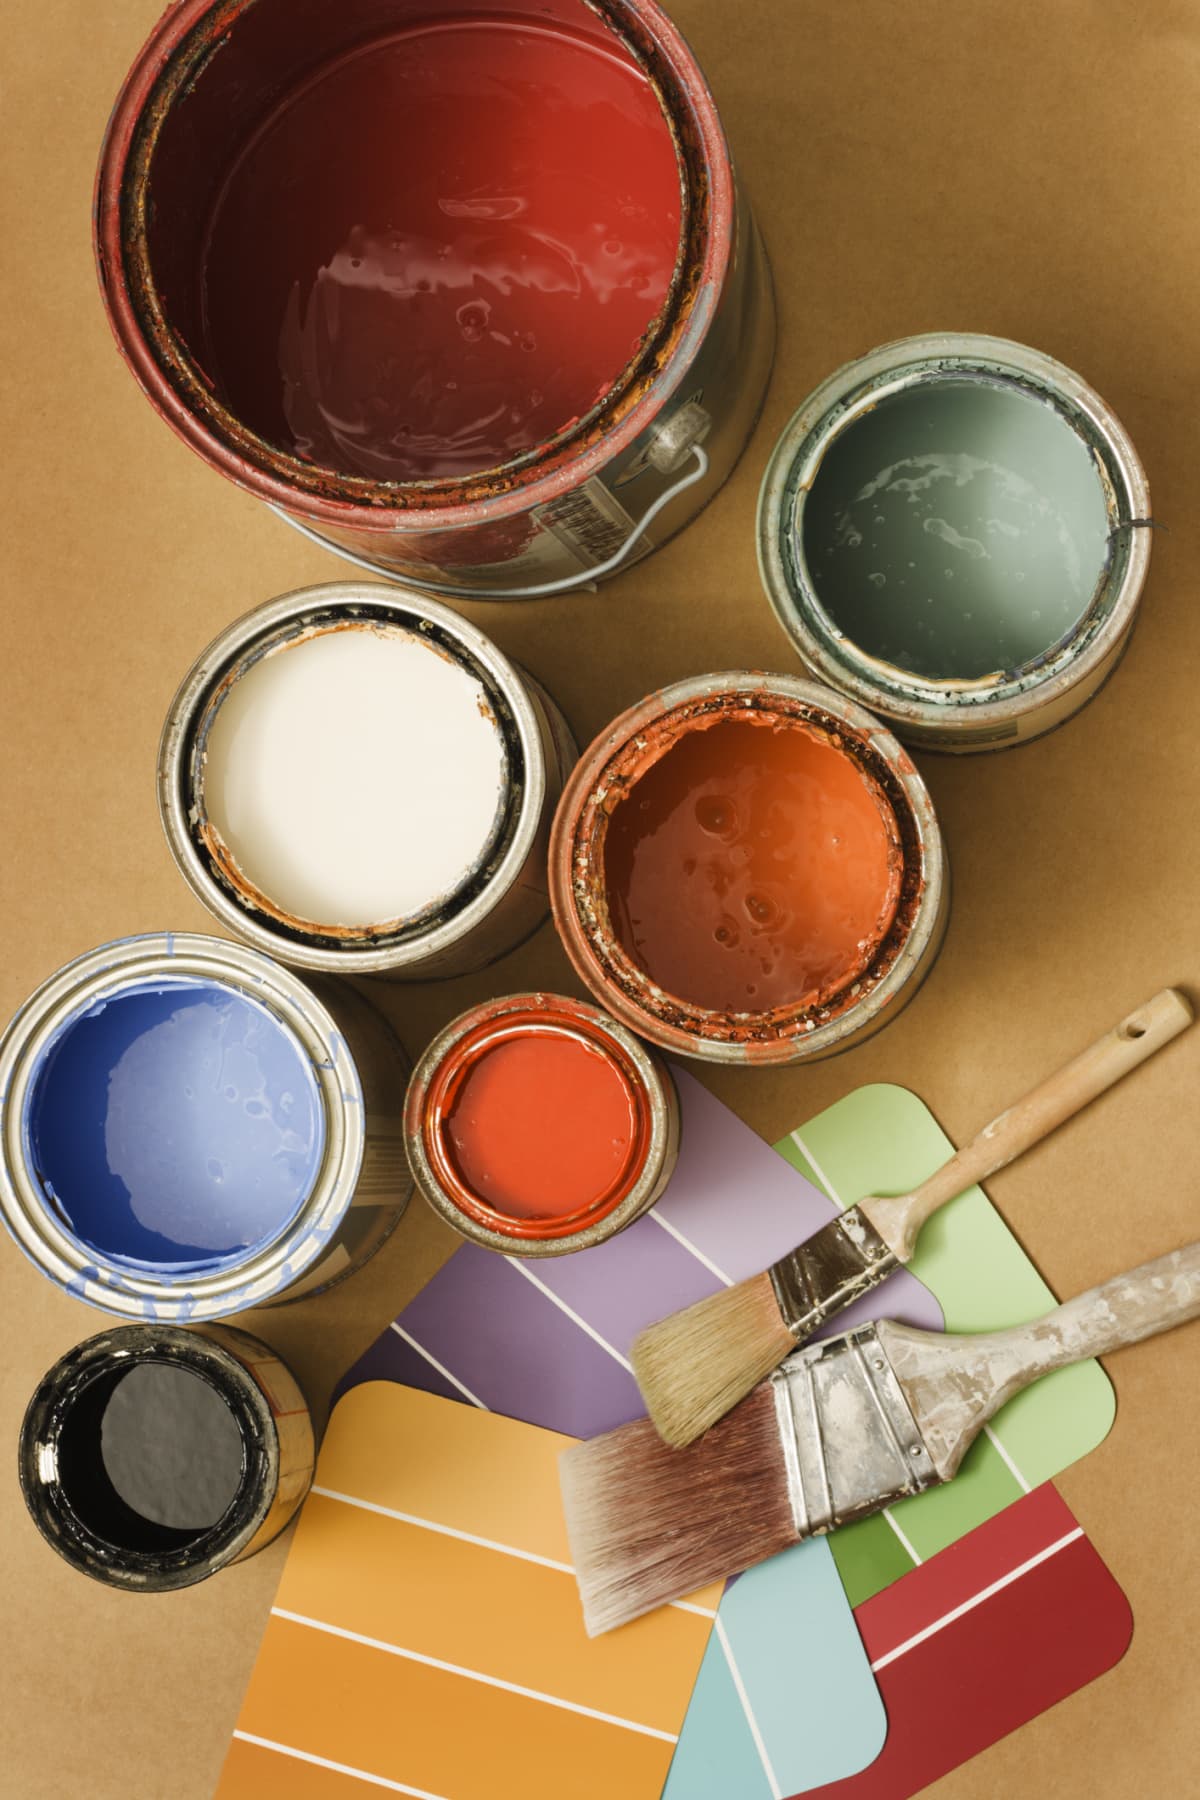 Open paint cans, paintbrushes and color swatches in preparation for home decorating and home improvement projects